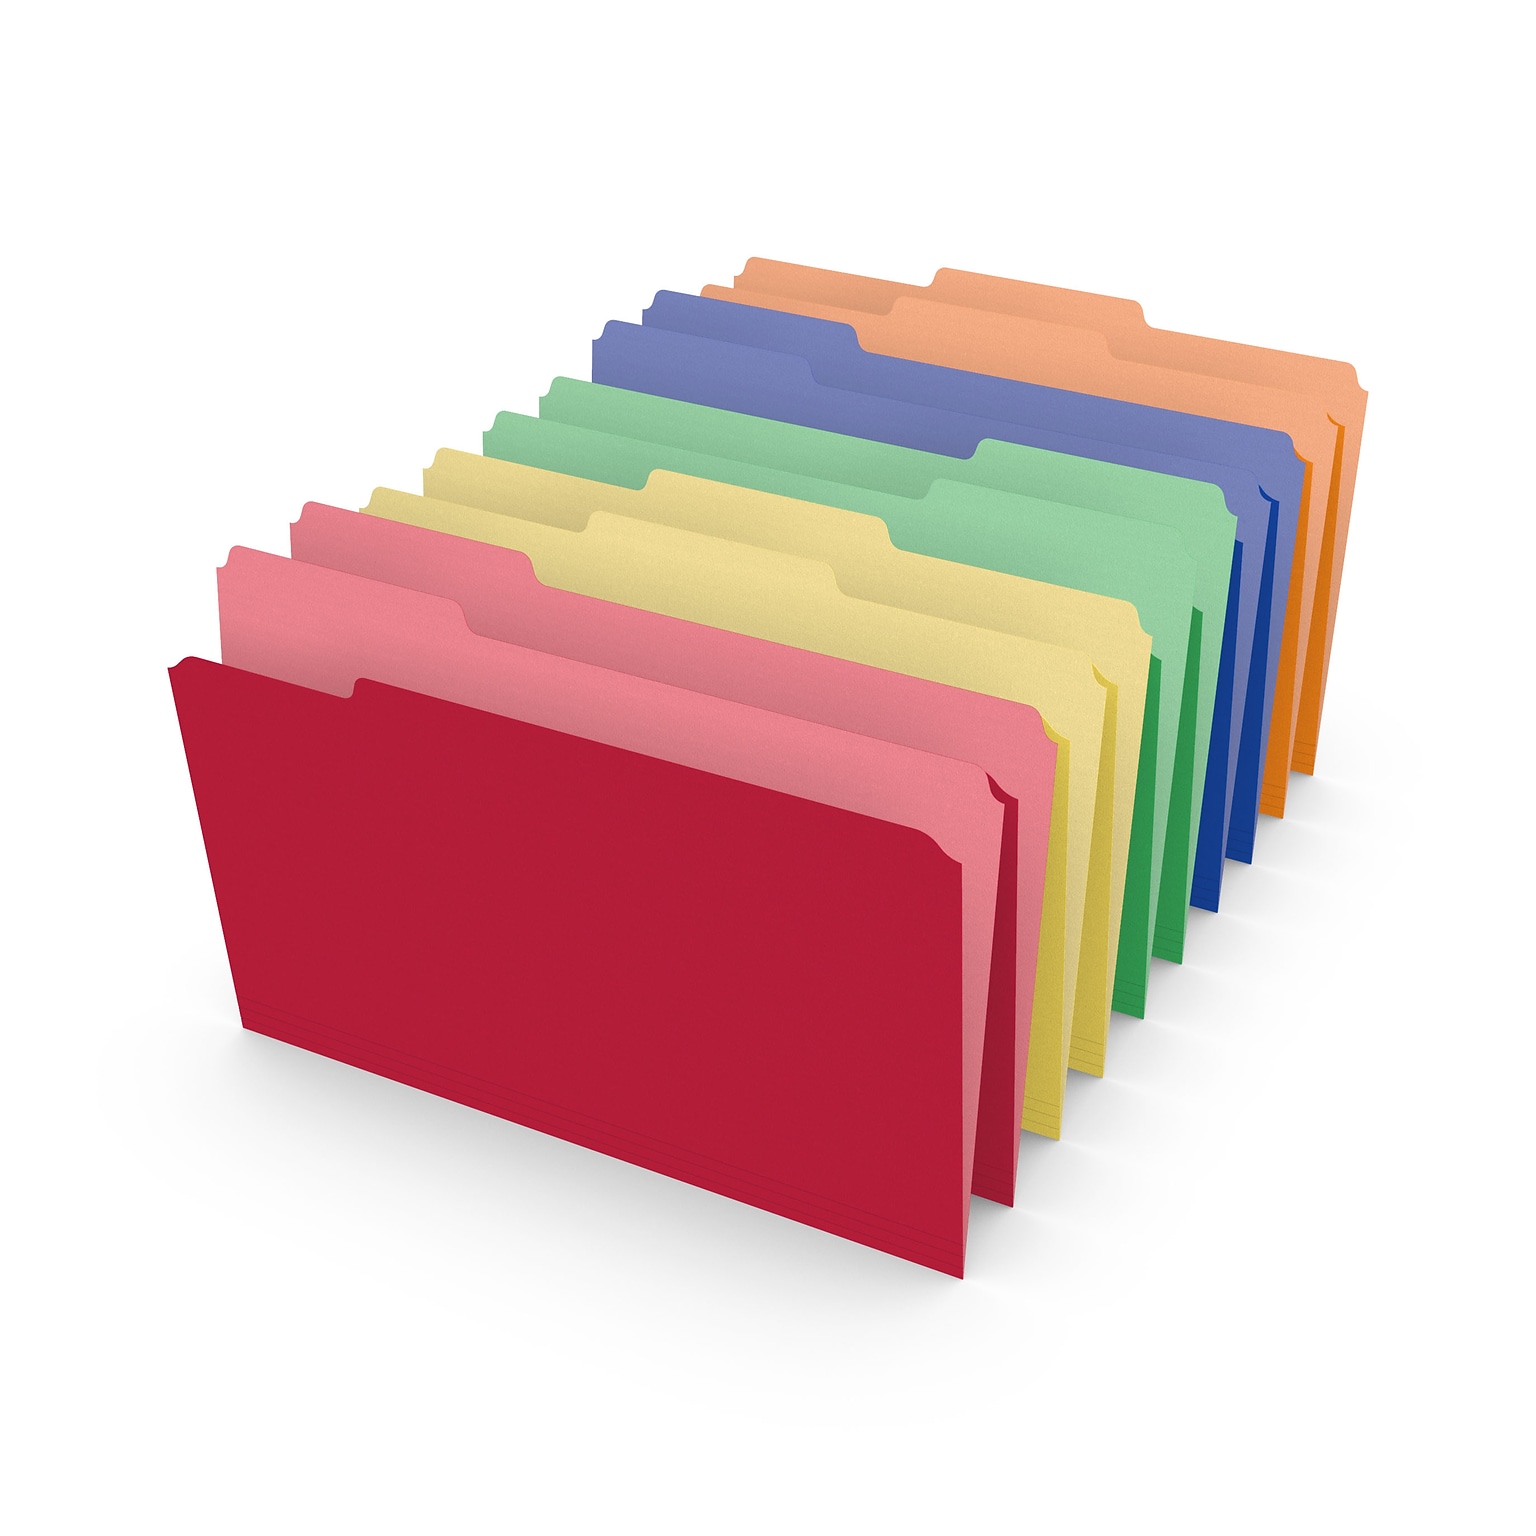 Staples® Heavyweight File Folders, 1/3 Cut Tab, Legal Size, Assorted Colors, 50/Box (TR18366)